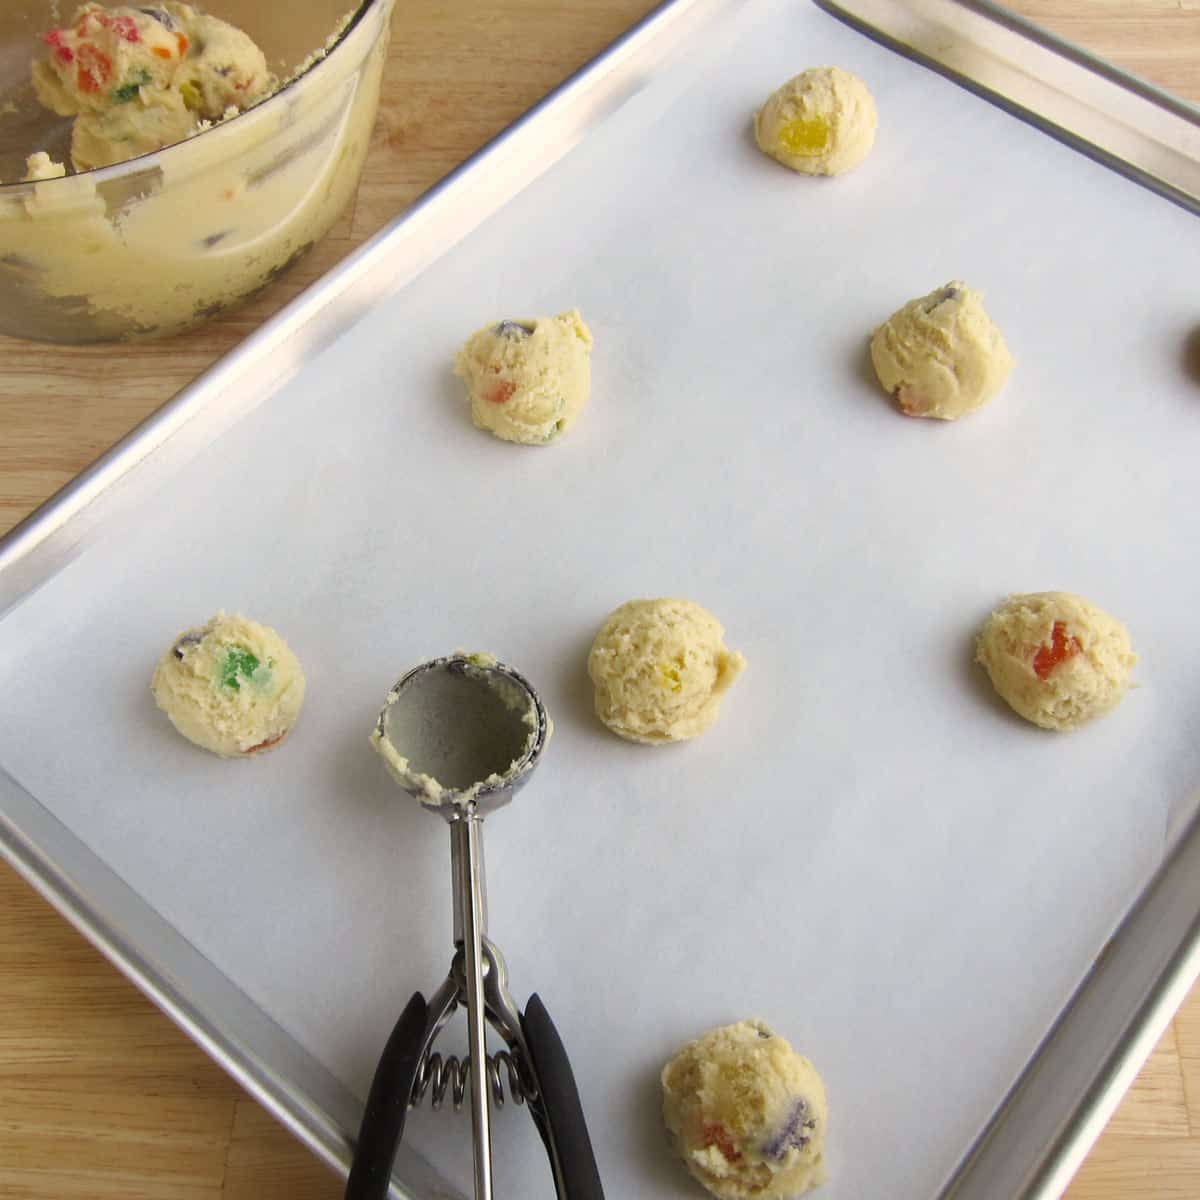 Scoop gumdrop cookie dough onto a parchment paper-lined cookie sheet.